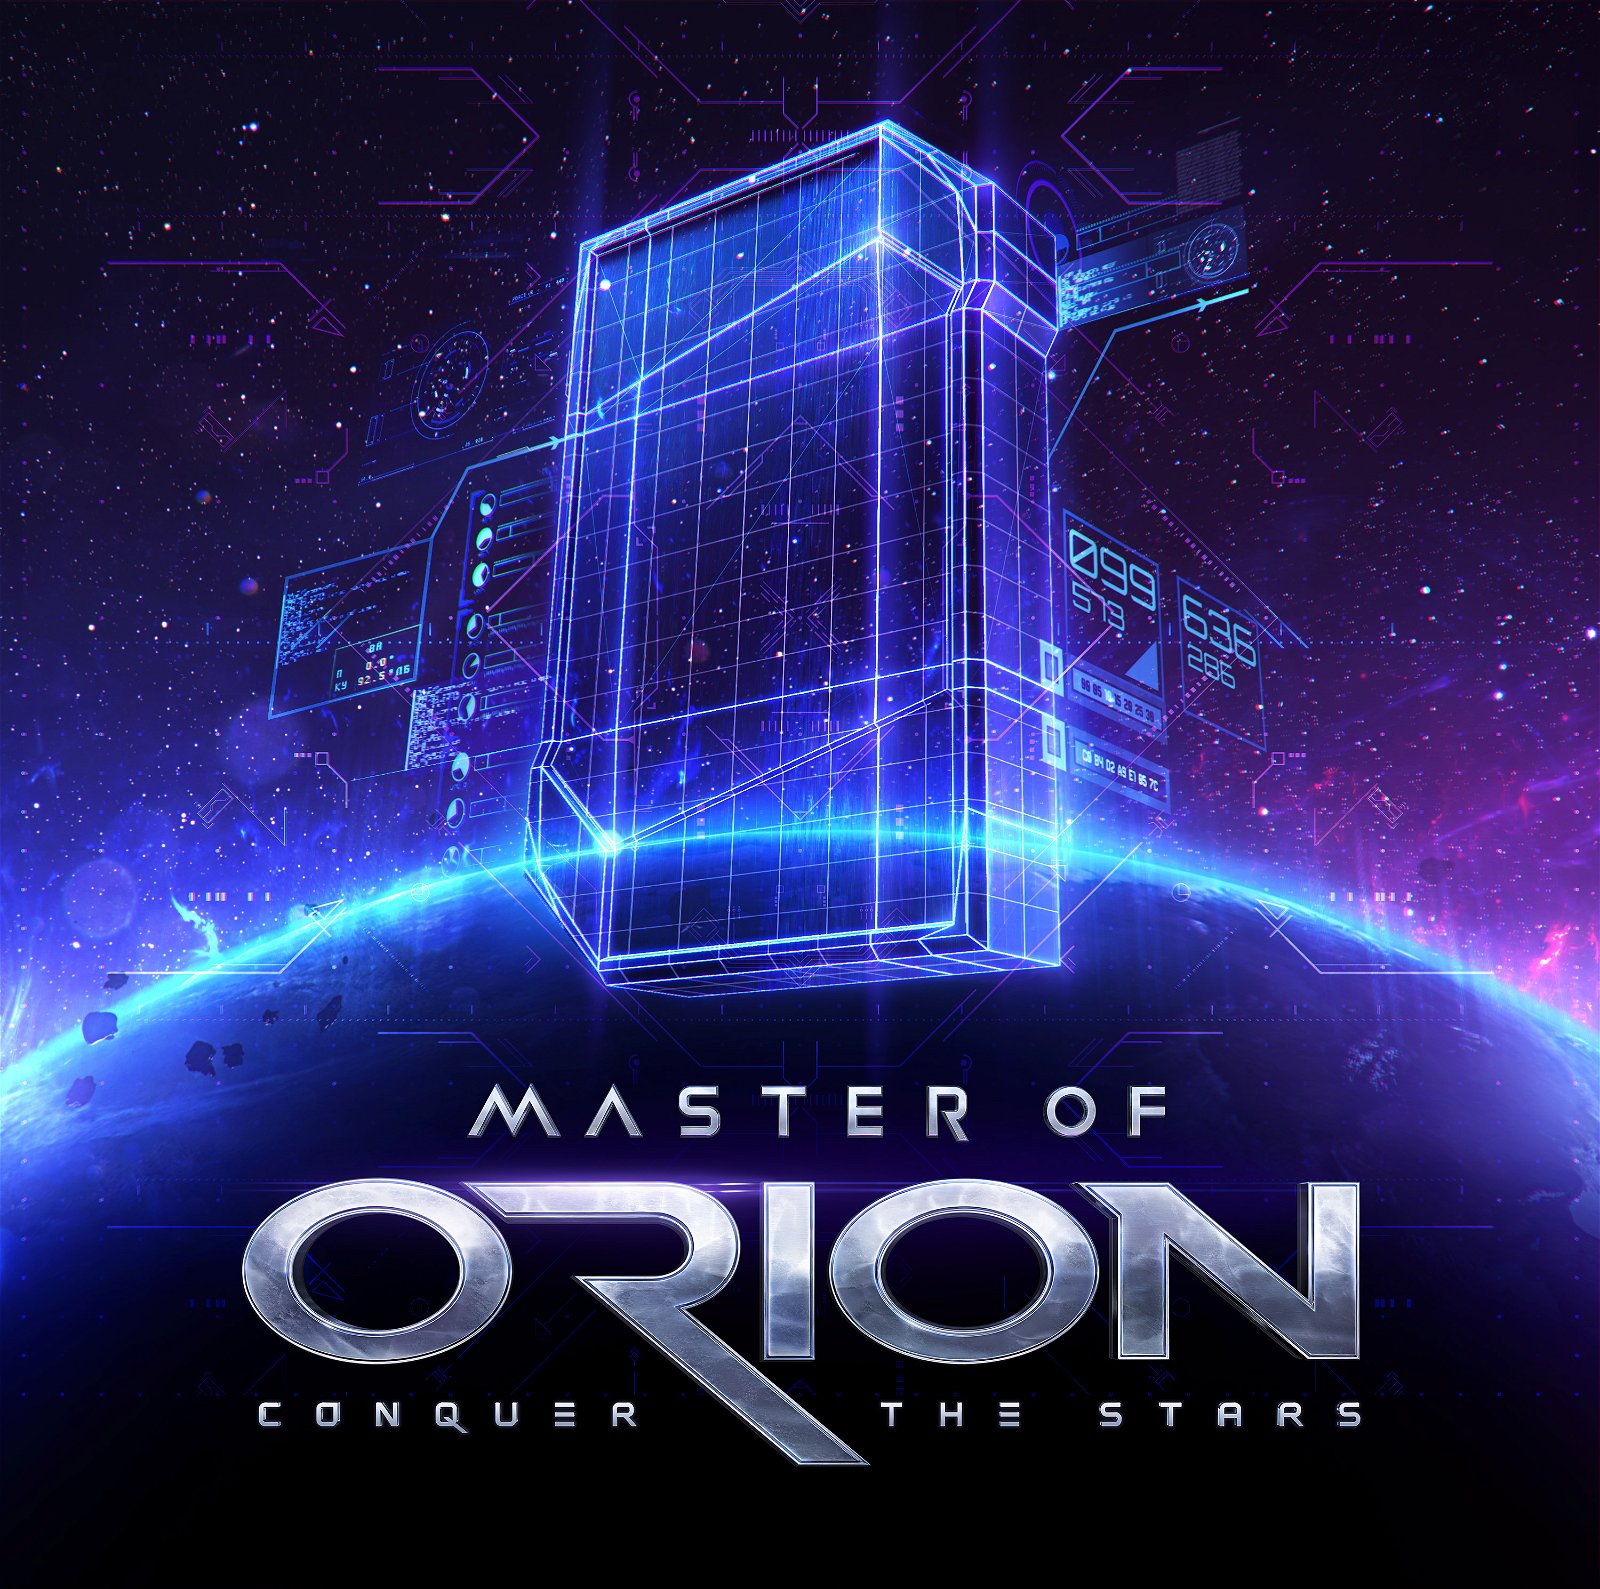 Image of Master of Orion